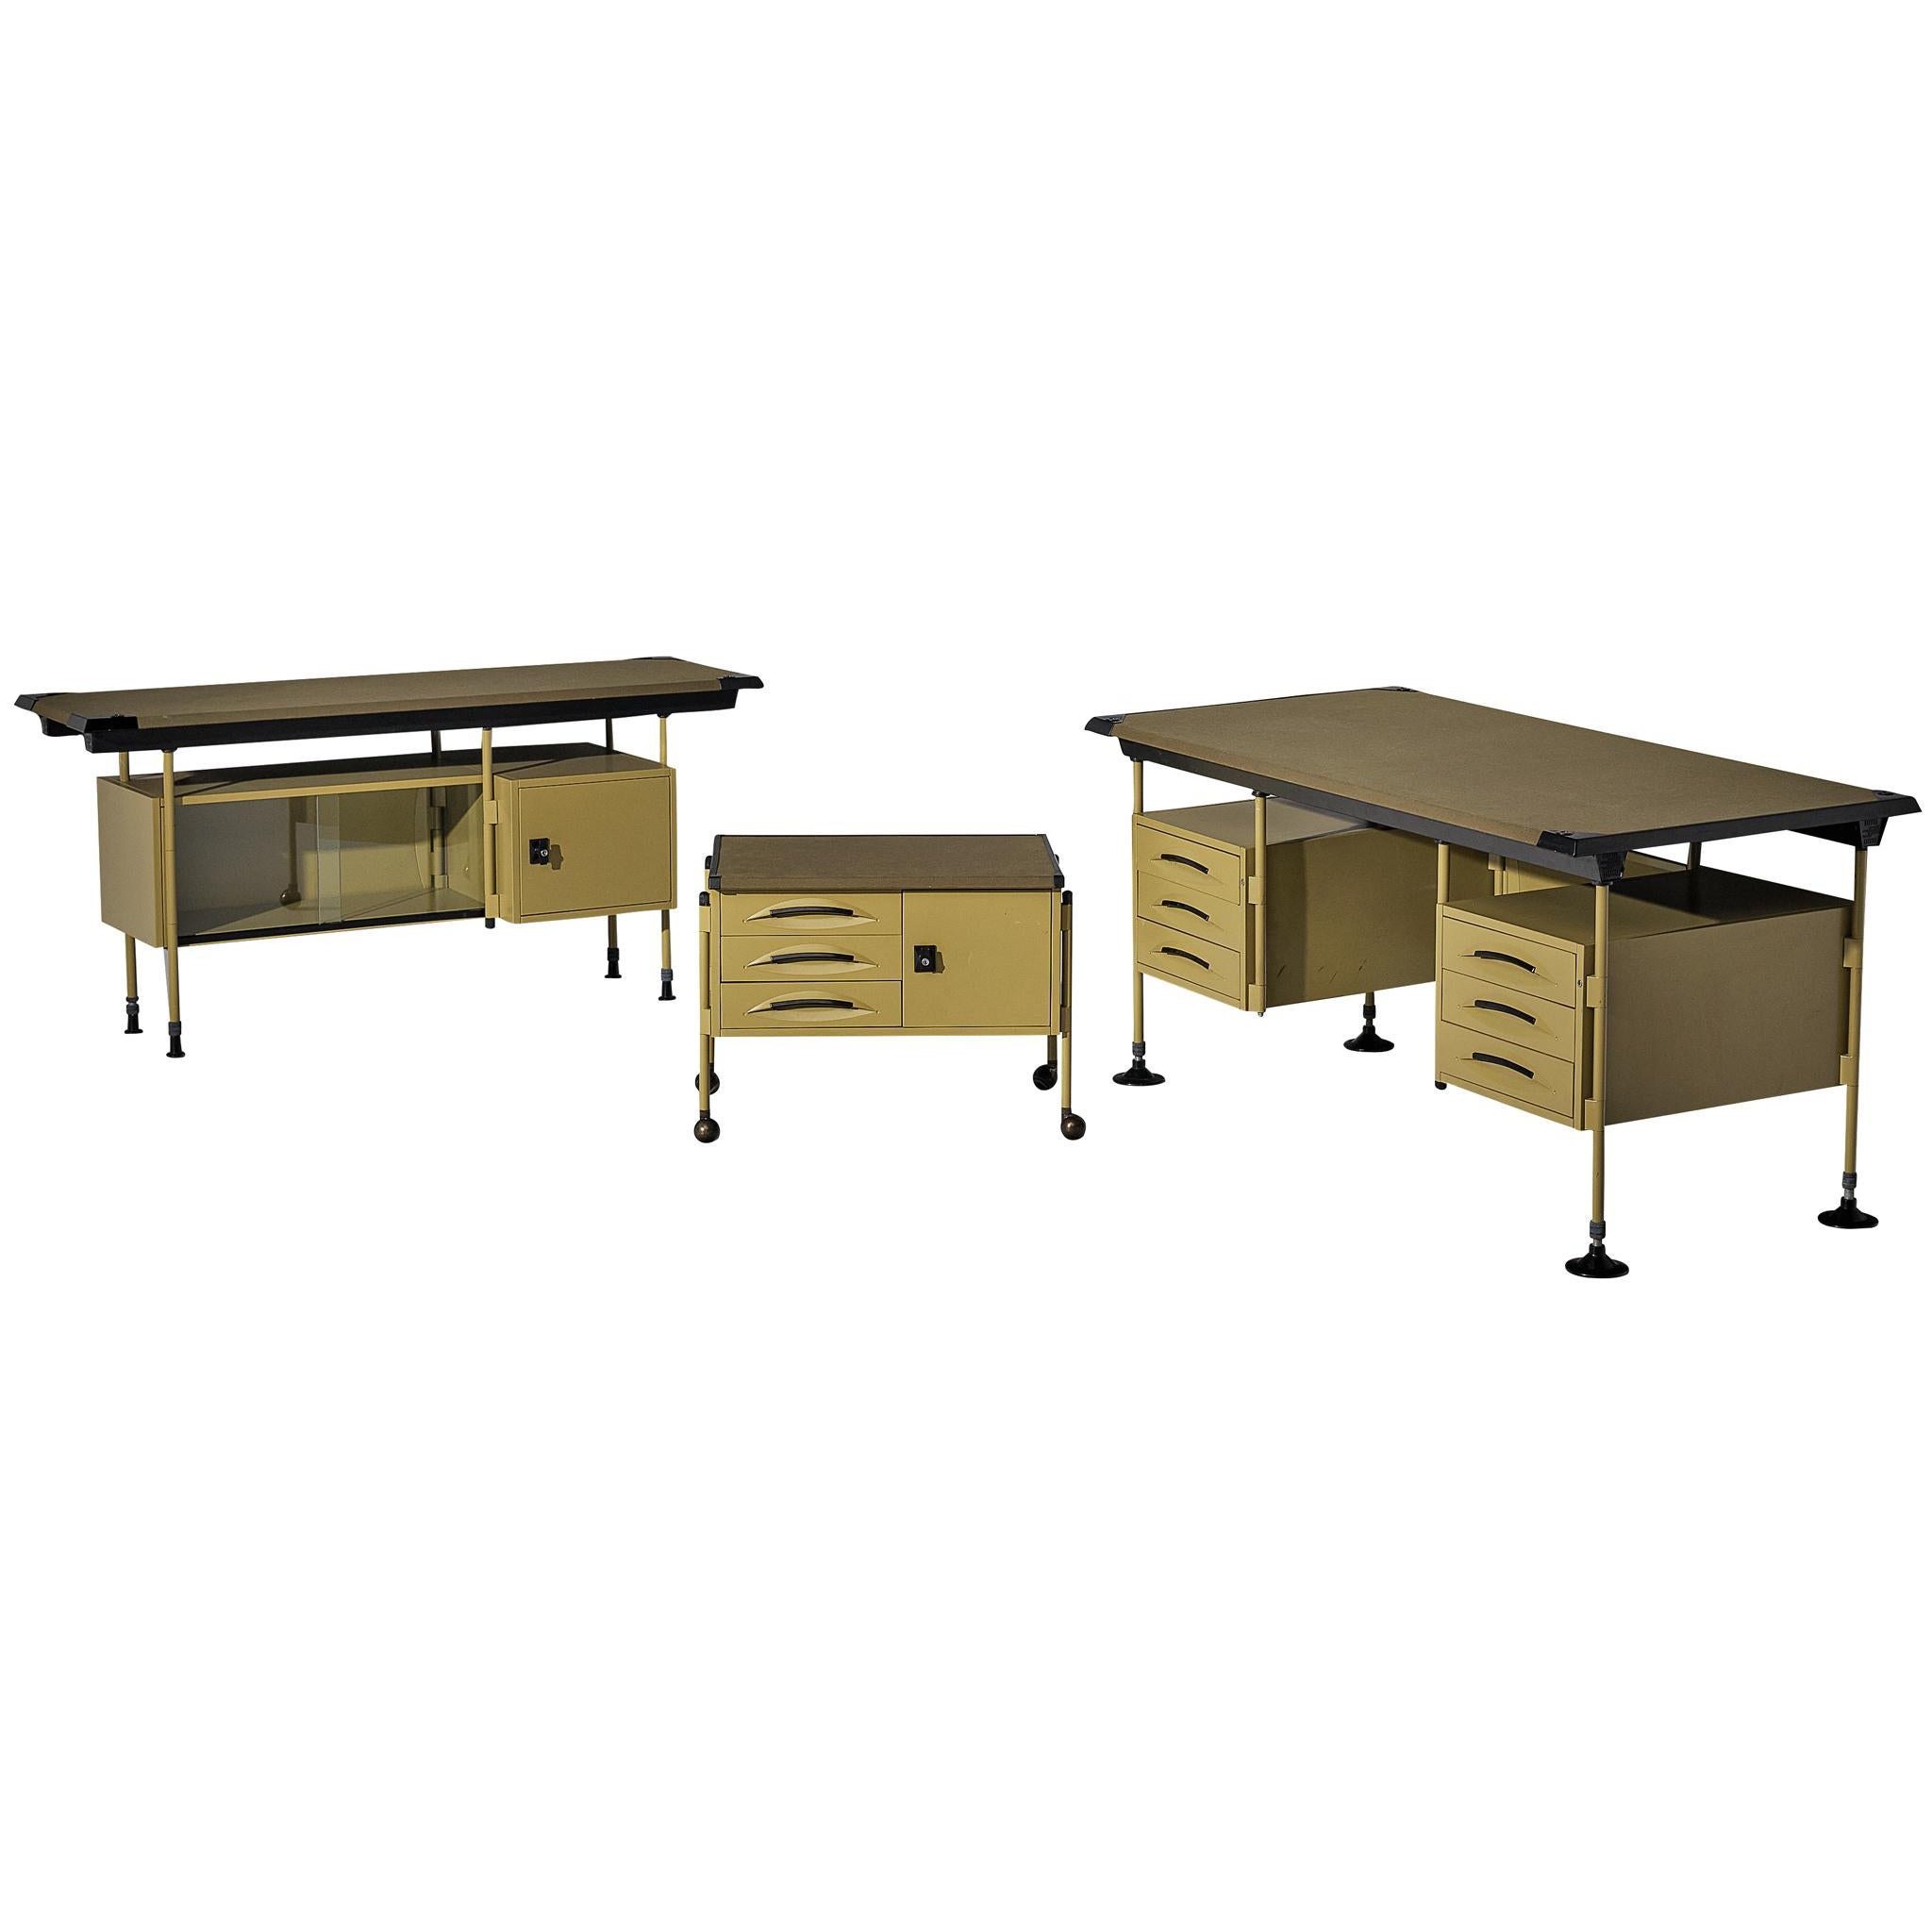 Studio BBPR for Olivetti 'Spazio' Set with Desk, Sideboard and Table  For Sale